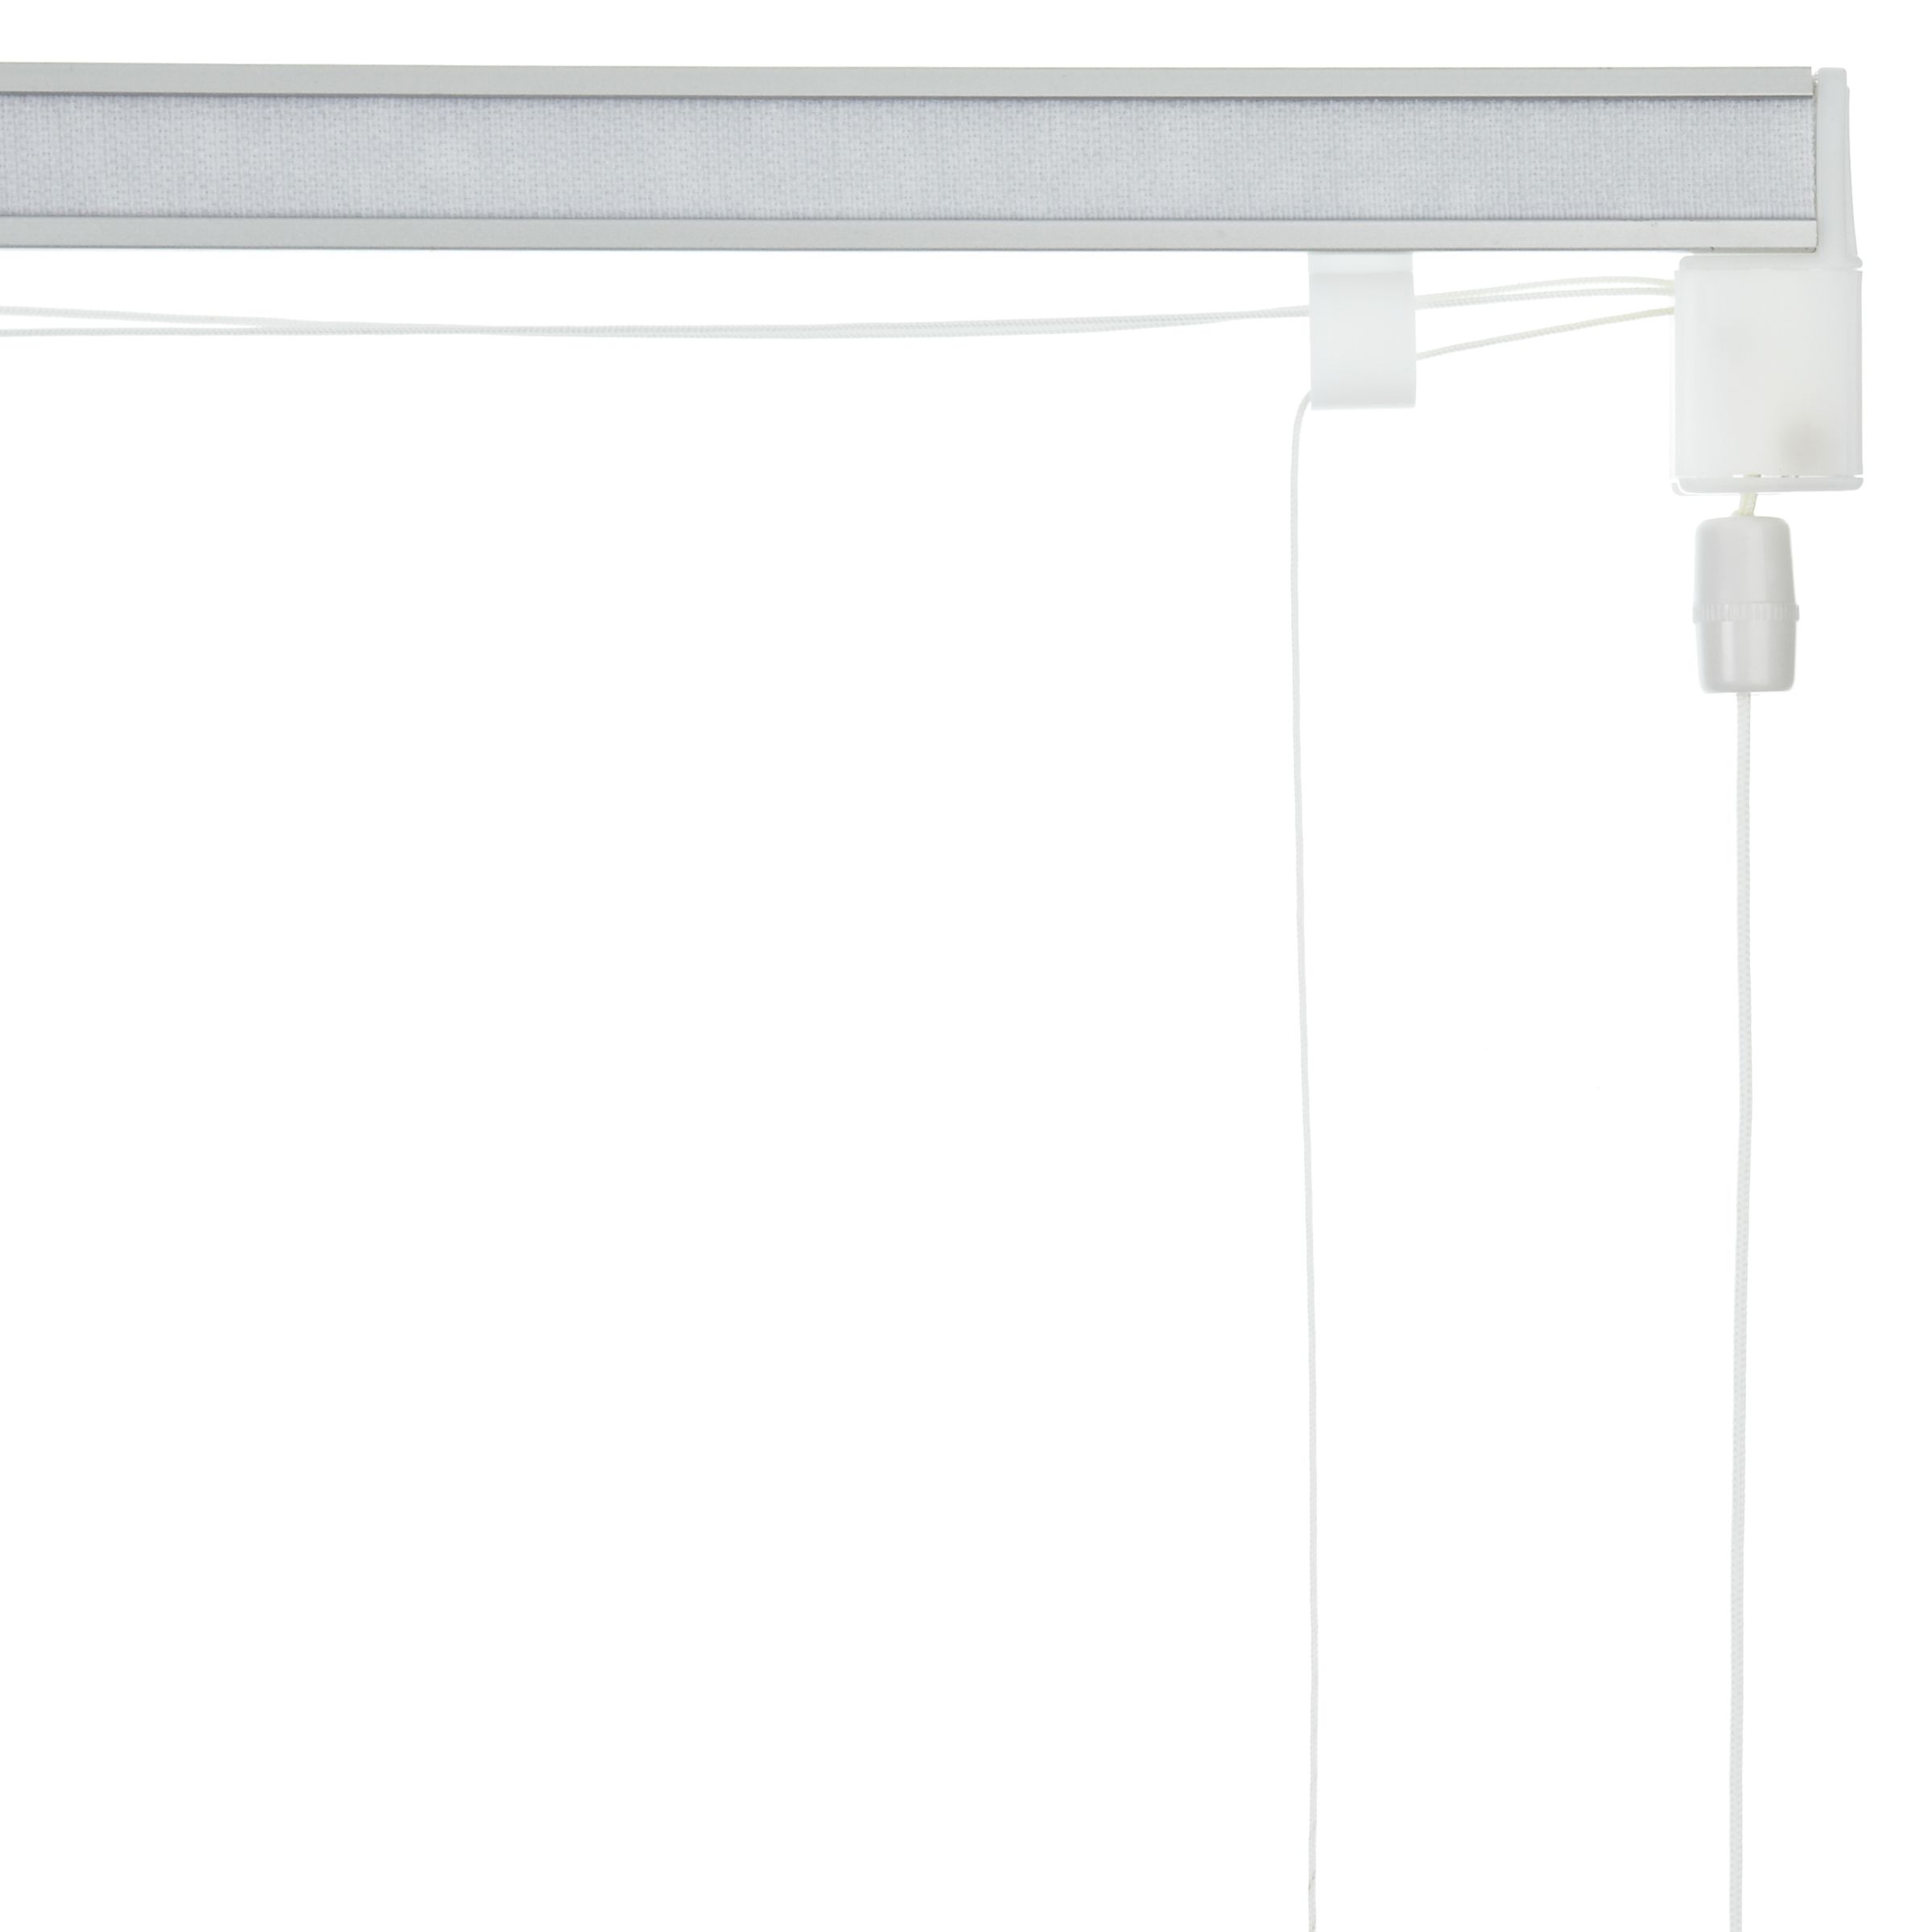 Details about   Speedy End cover x 2 only for use with the Speedy corded Roman blind Kits 